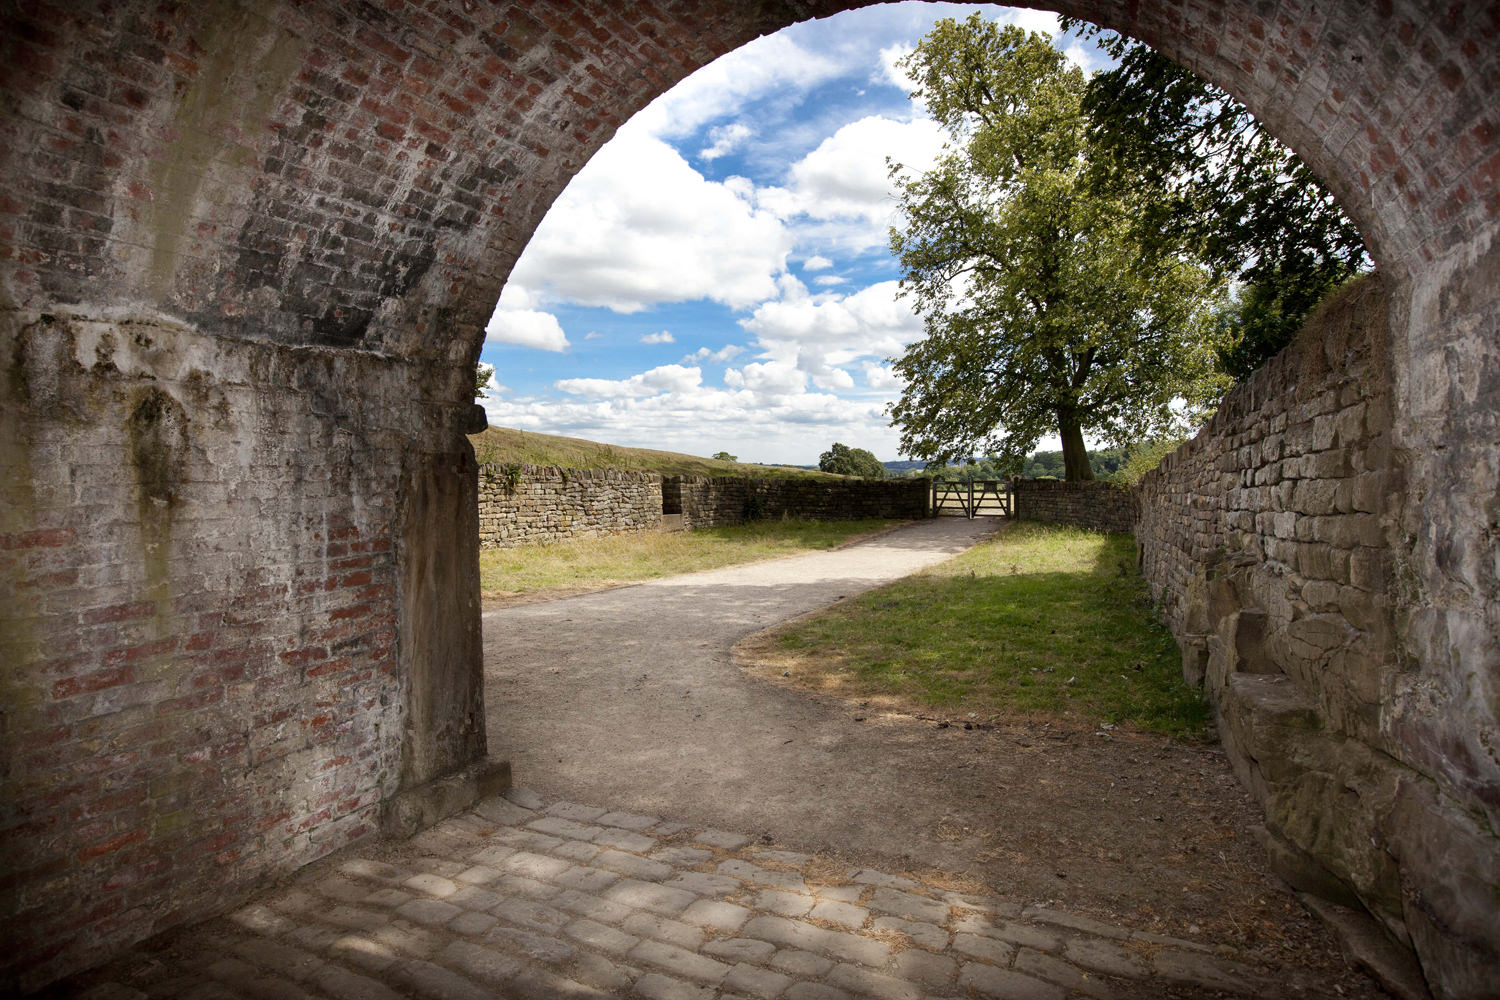 The view from a brick archway out over the countryside with a blue, cloudy sky